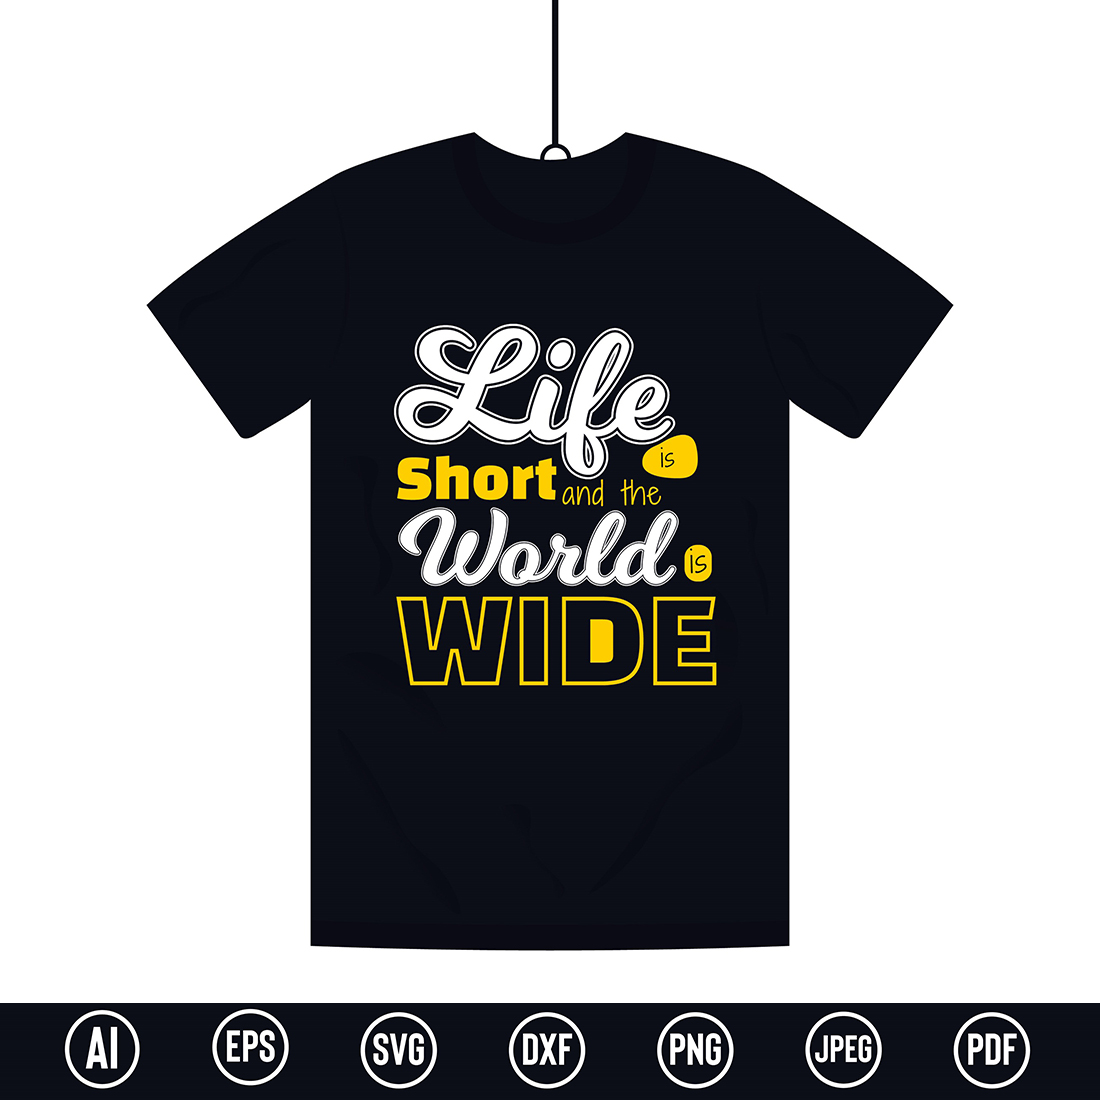 Motivational traveler Typography T-Shirt design with “Life is short and the world is wide” quote for t-shirt, posters, stickers, mug prints, banners, gift cards, labels etc cover image.